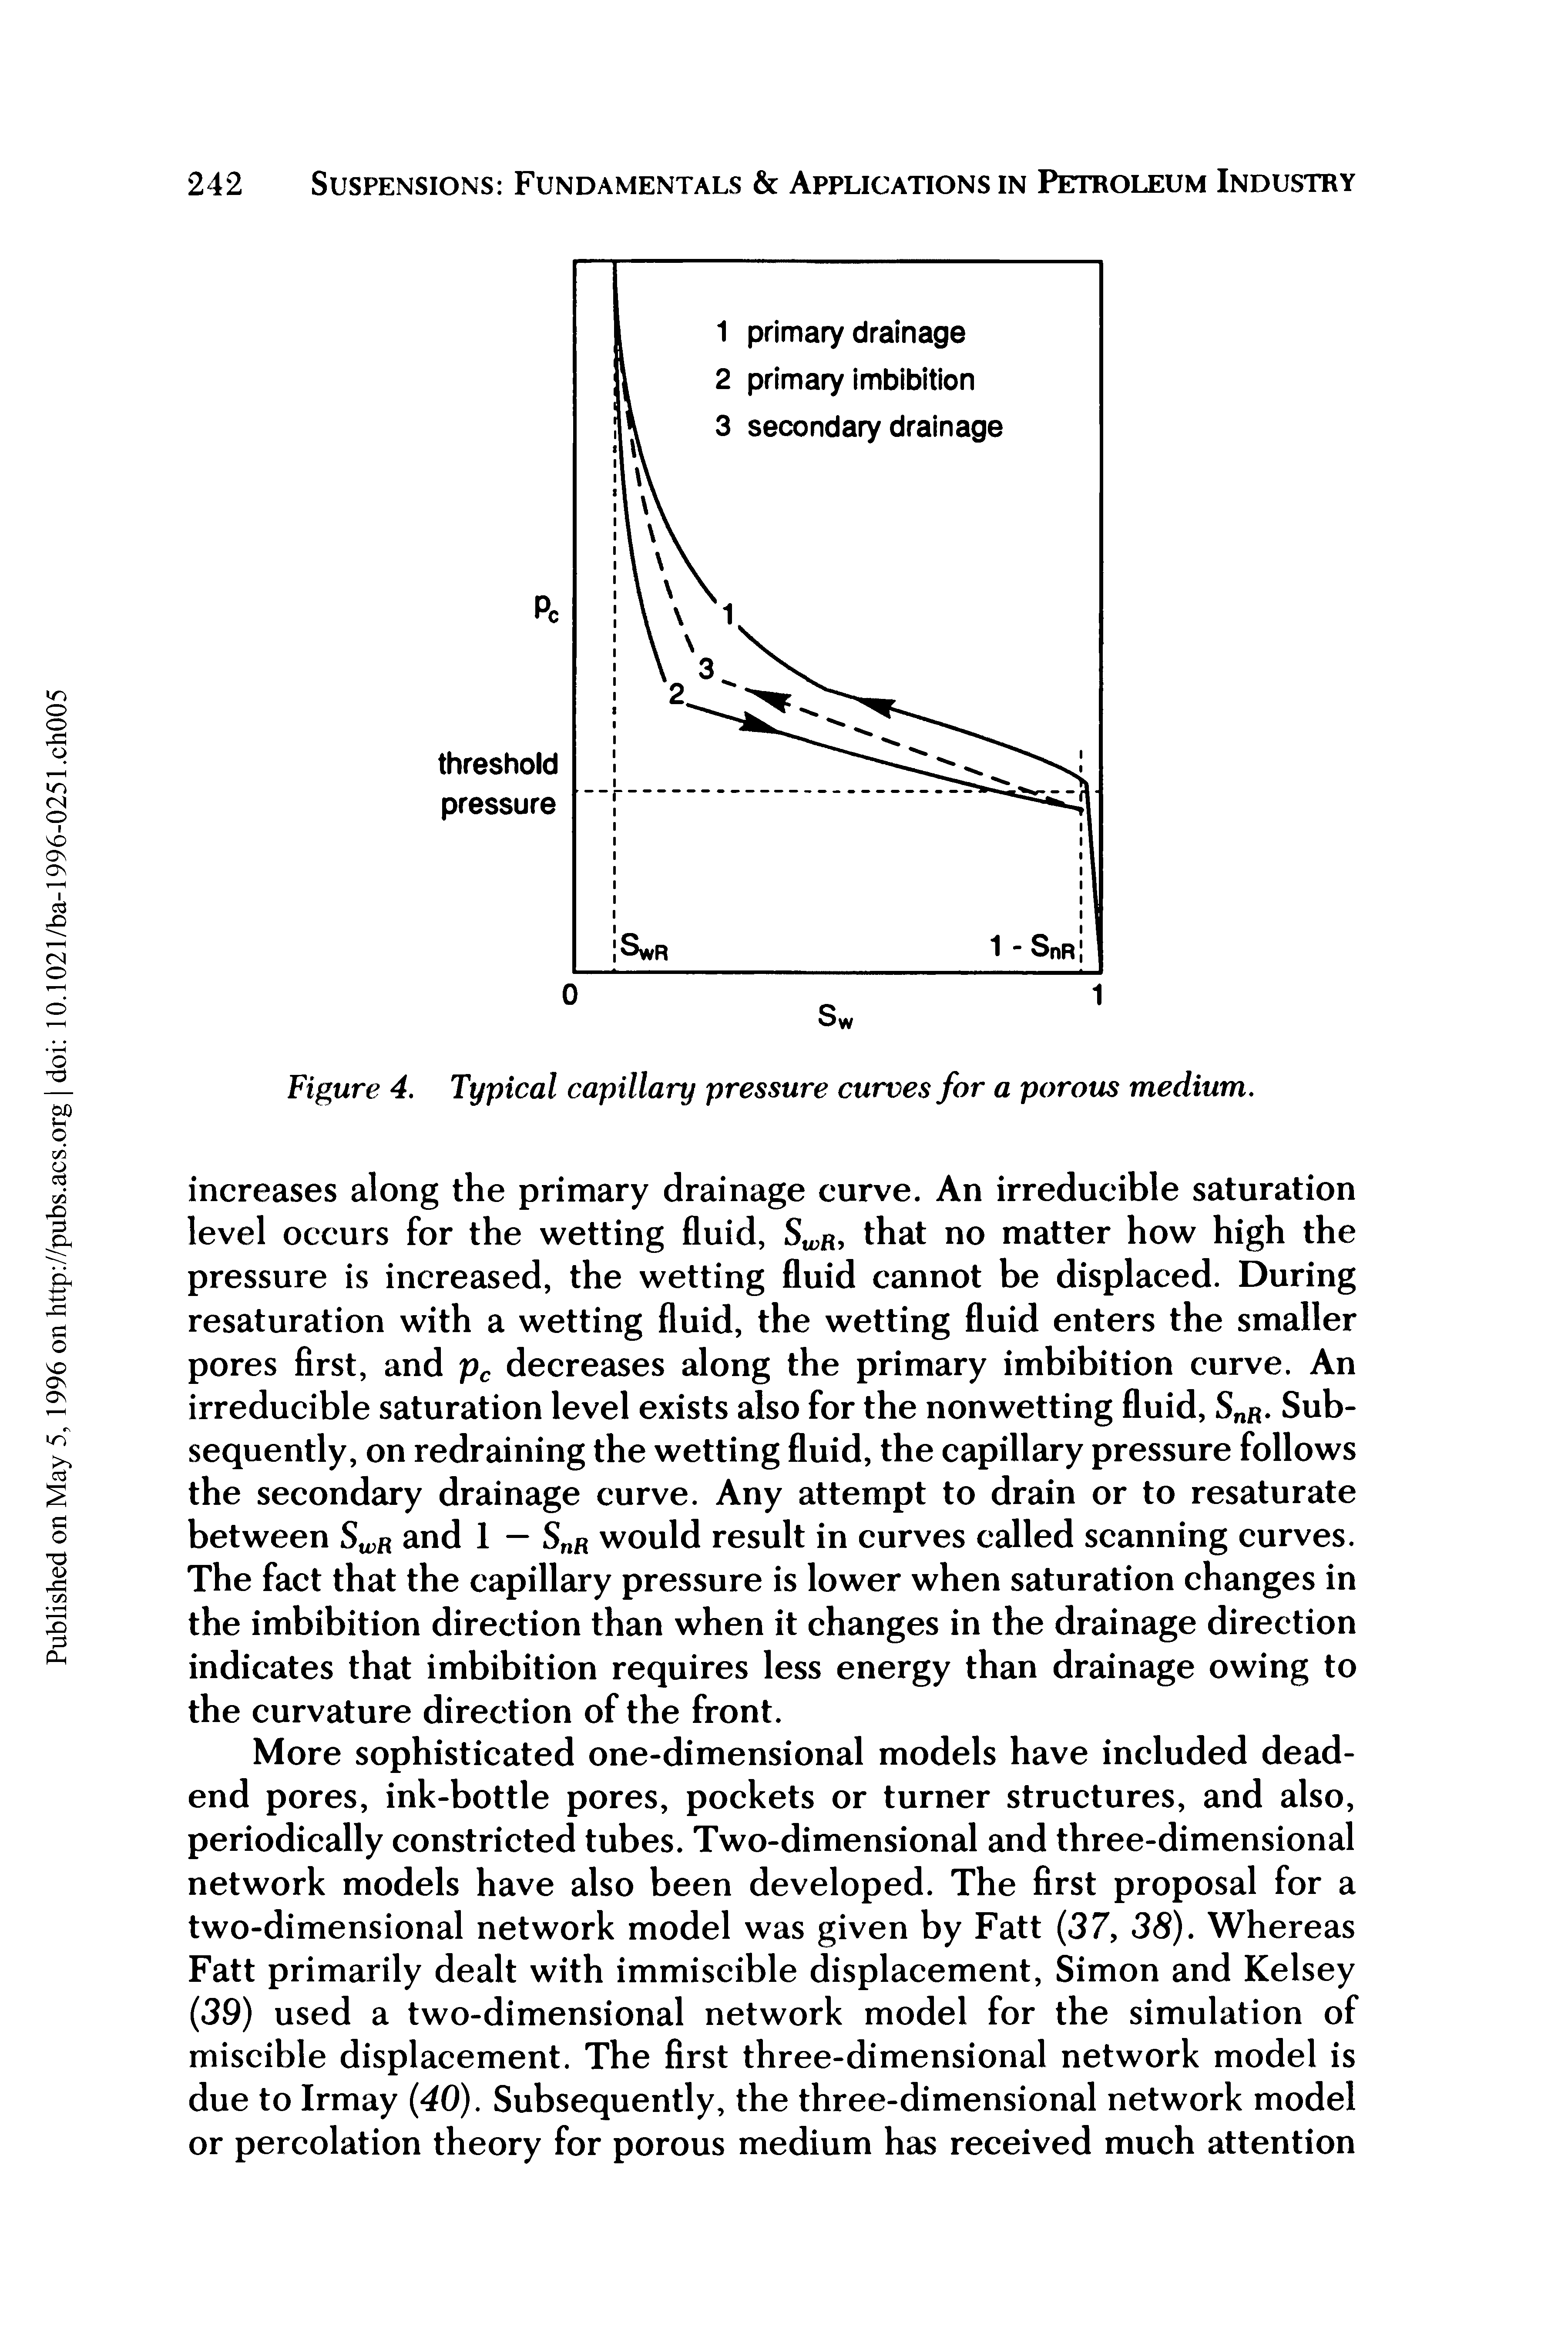 Figure 4. Typical capillary pressure curves for a porous medium.